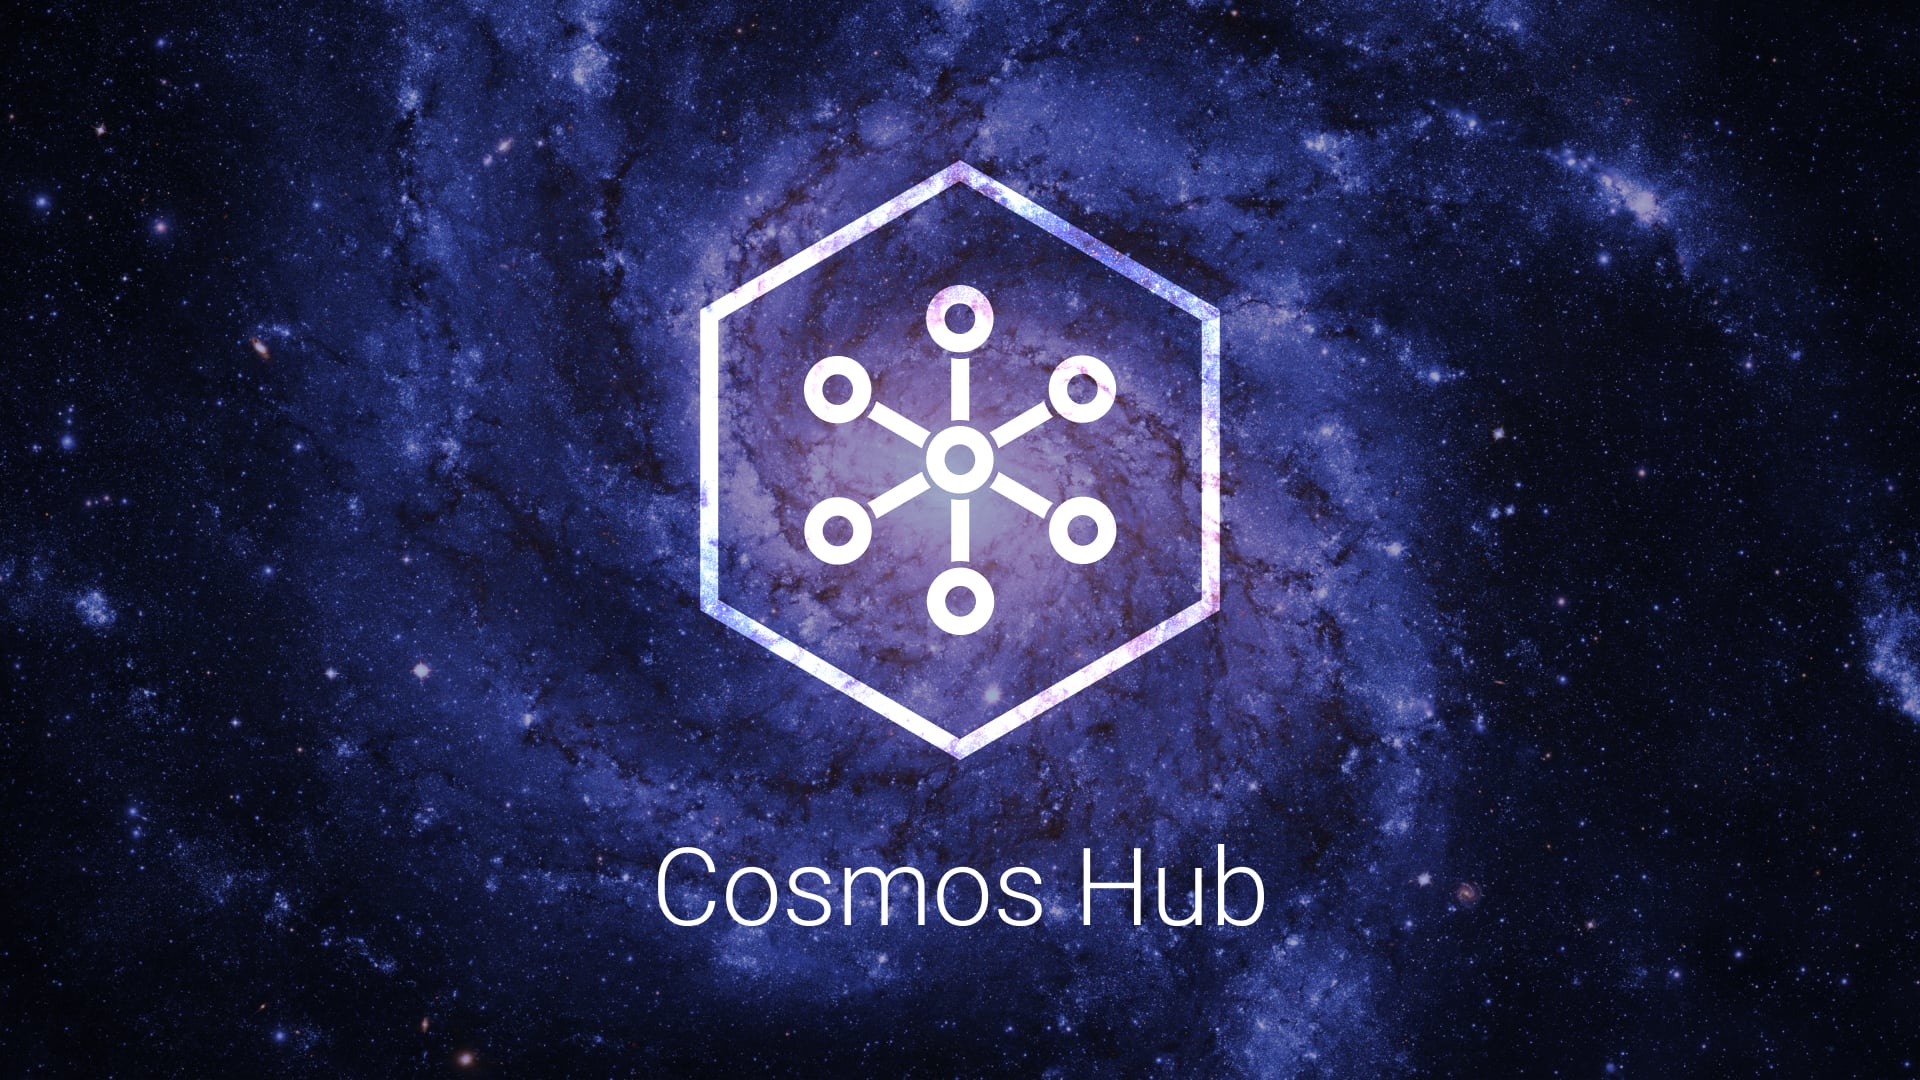 Welcome to the Cosmos Hub